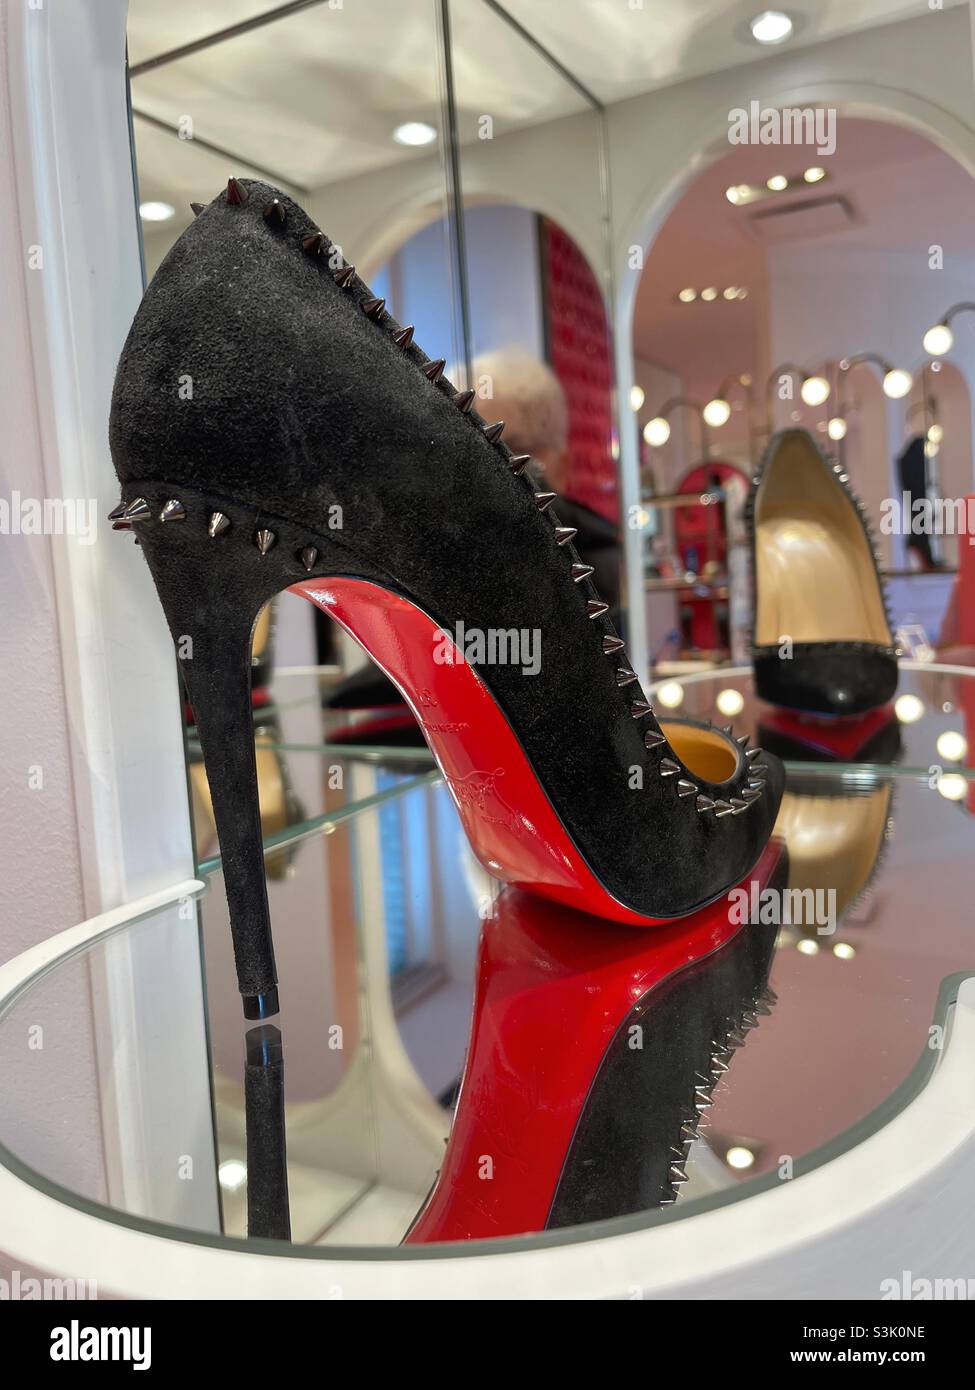 Christian Louboutin High heel shoe features it's signature red soles, Saks  fifth Ave., NYC, USA Stock Photo - Alamy